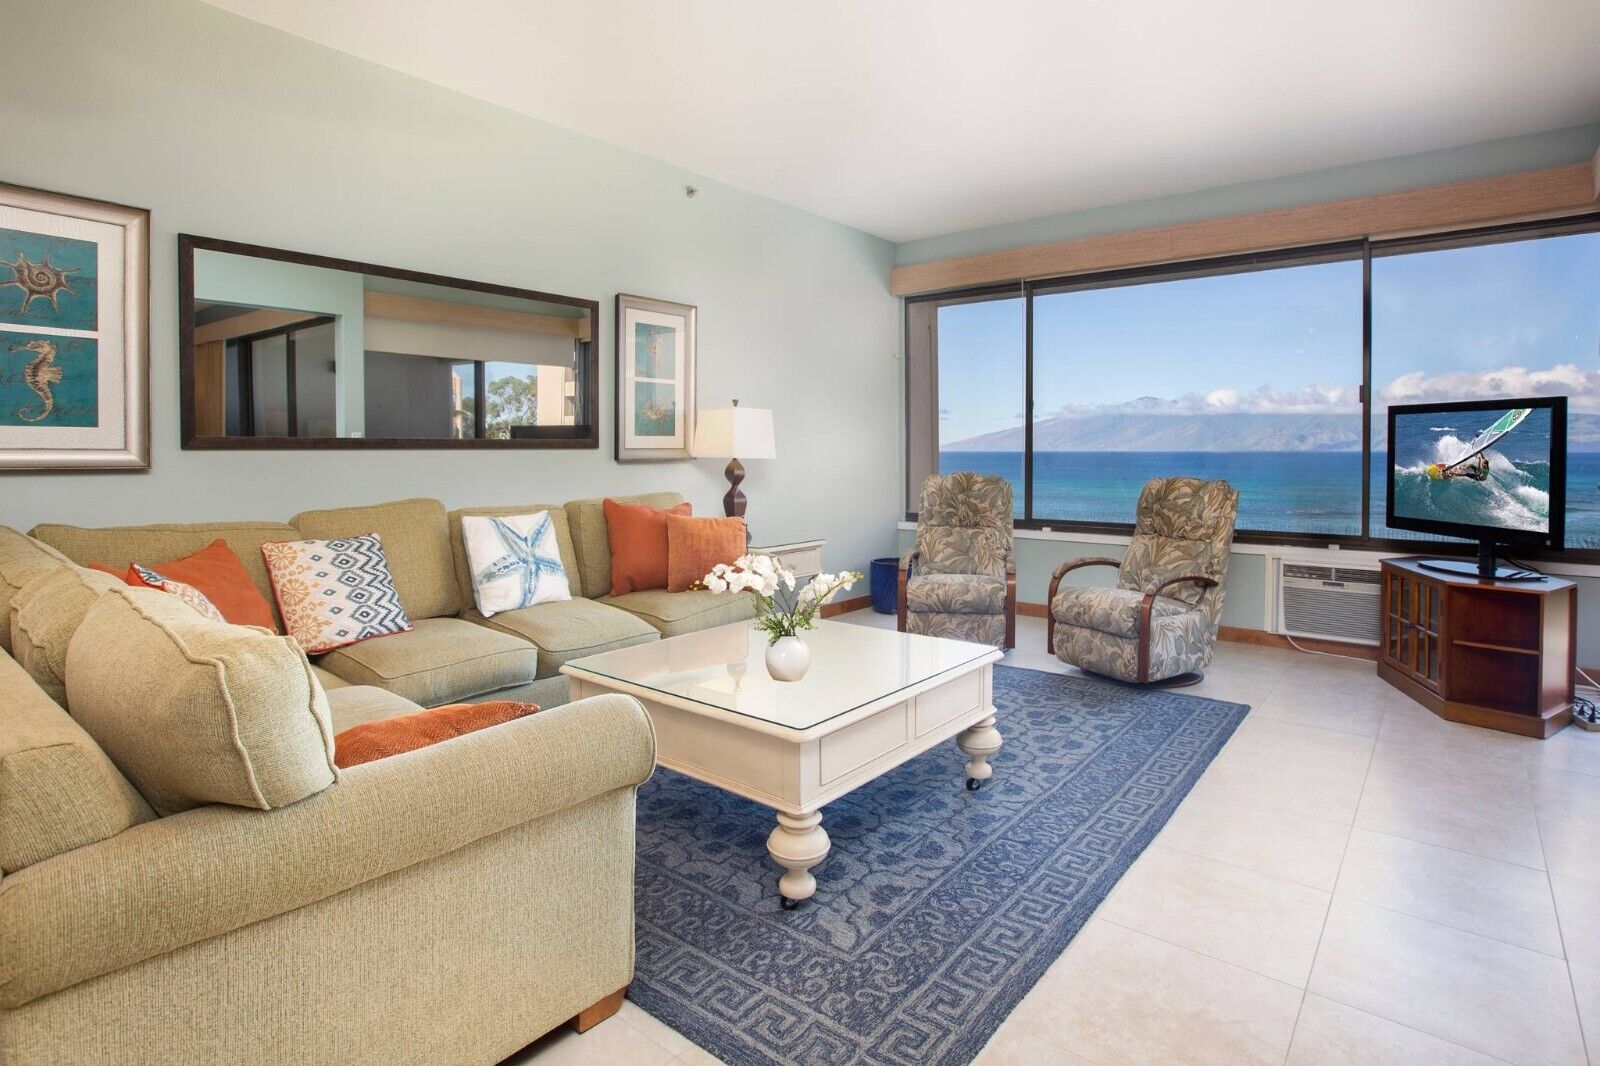 2 Bedroom Condo in Maui for 7 nights on the Ocean Sands of Kahana